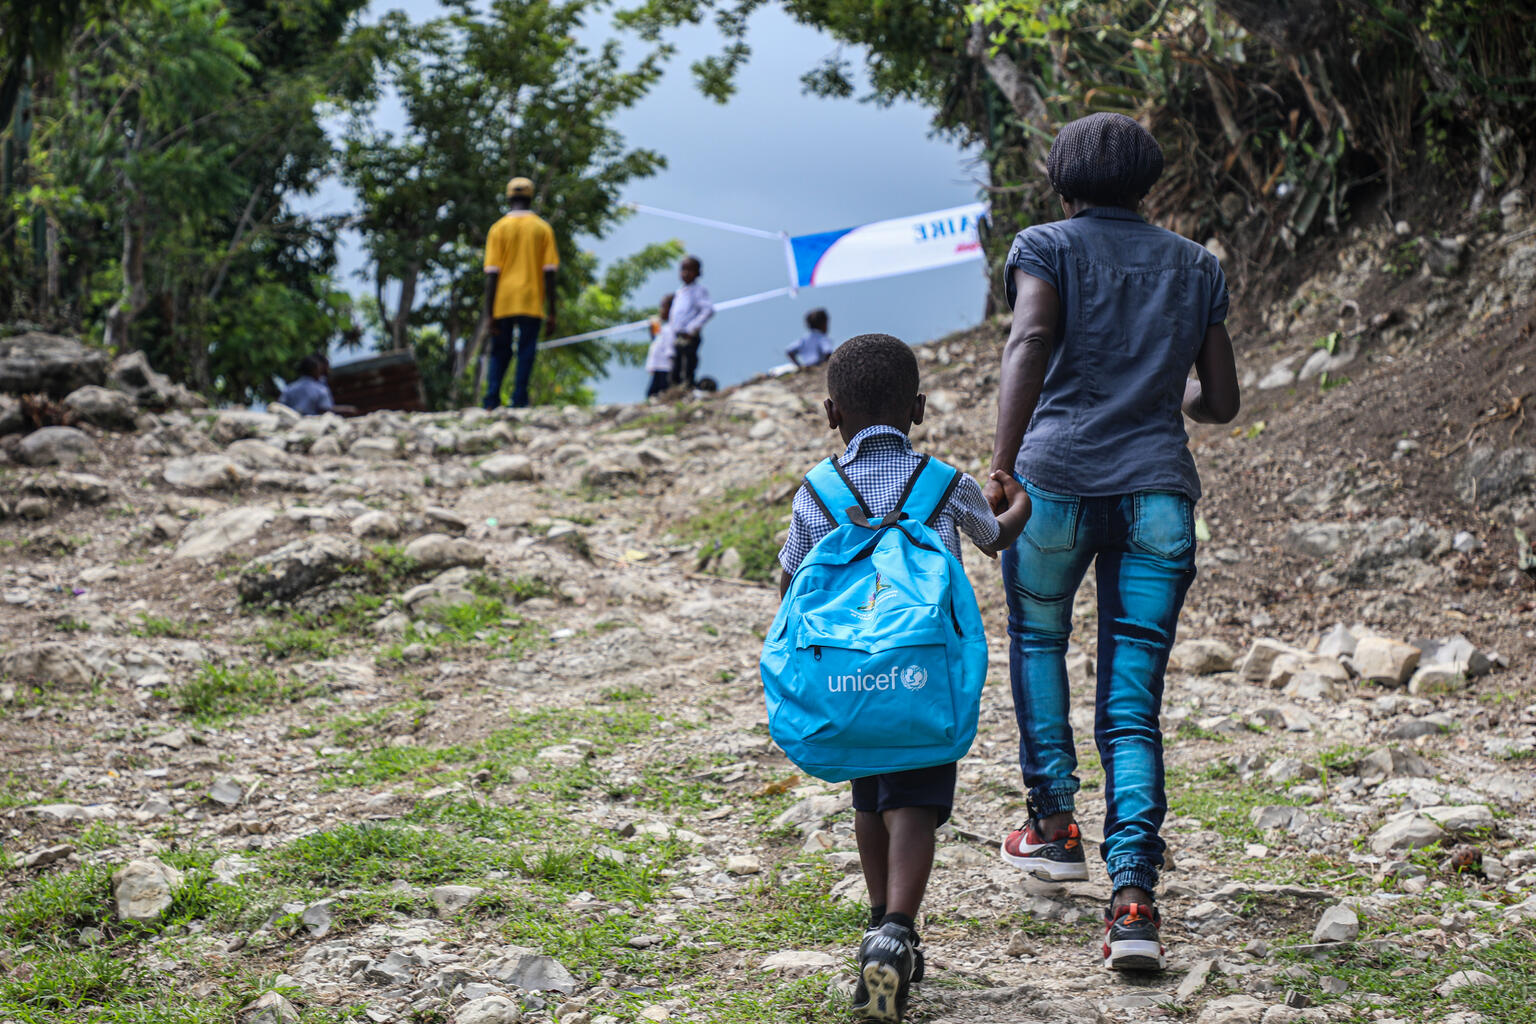 A mother and child walk hand-in-hand in Haiti. The child is wearing a blue unicef backpack.